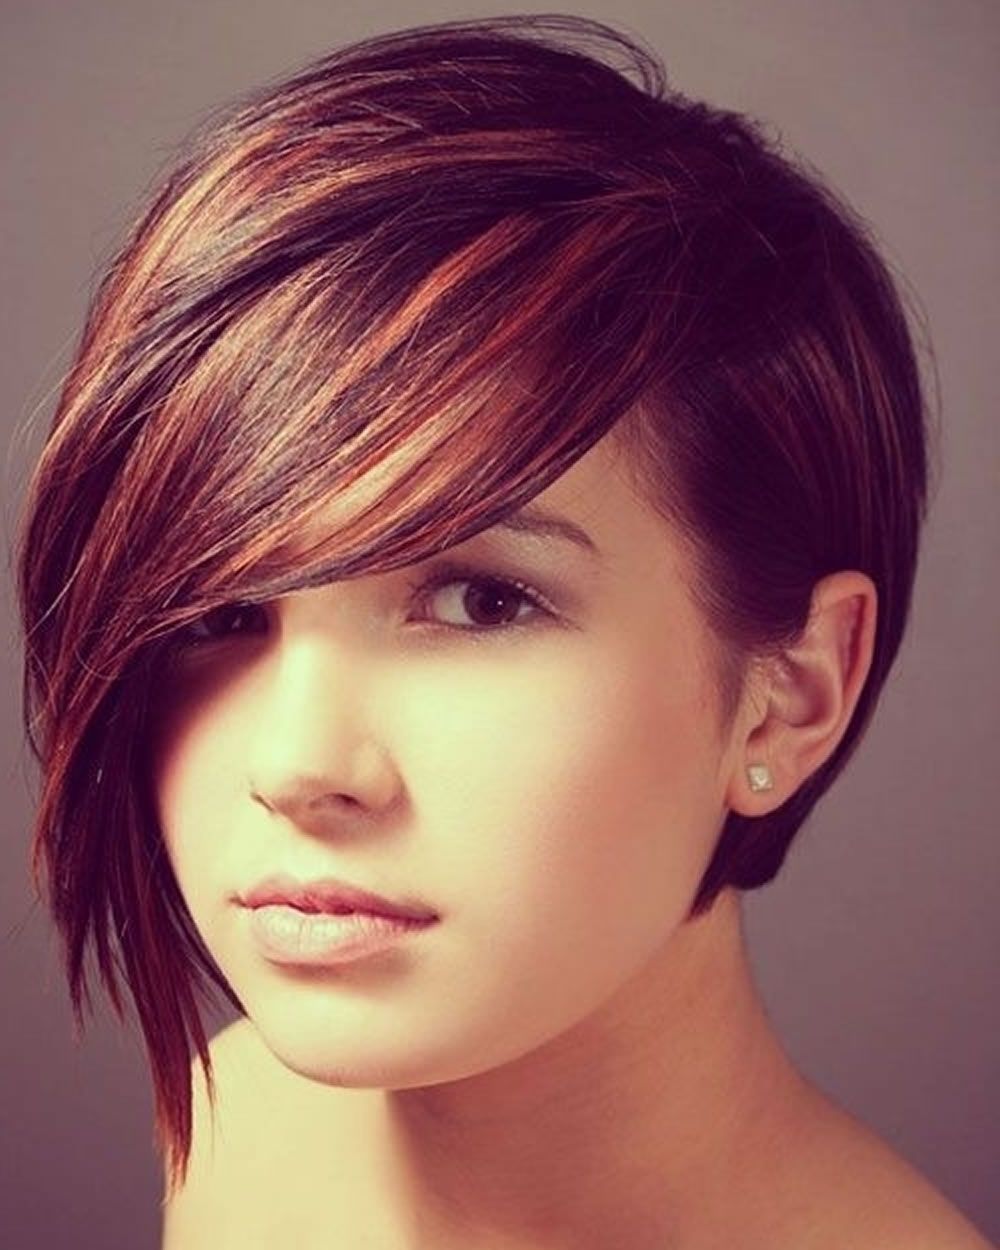 Asymmetrical Short Thick Hair Round Faces 2018 – Hairstyles Throughout Newest Asymmetrical Long Pixie For Round Faces (View 13 of 15)